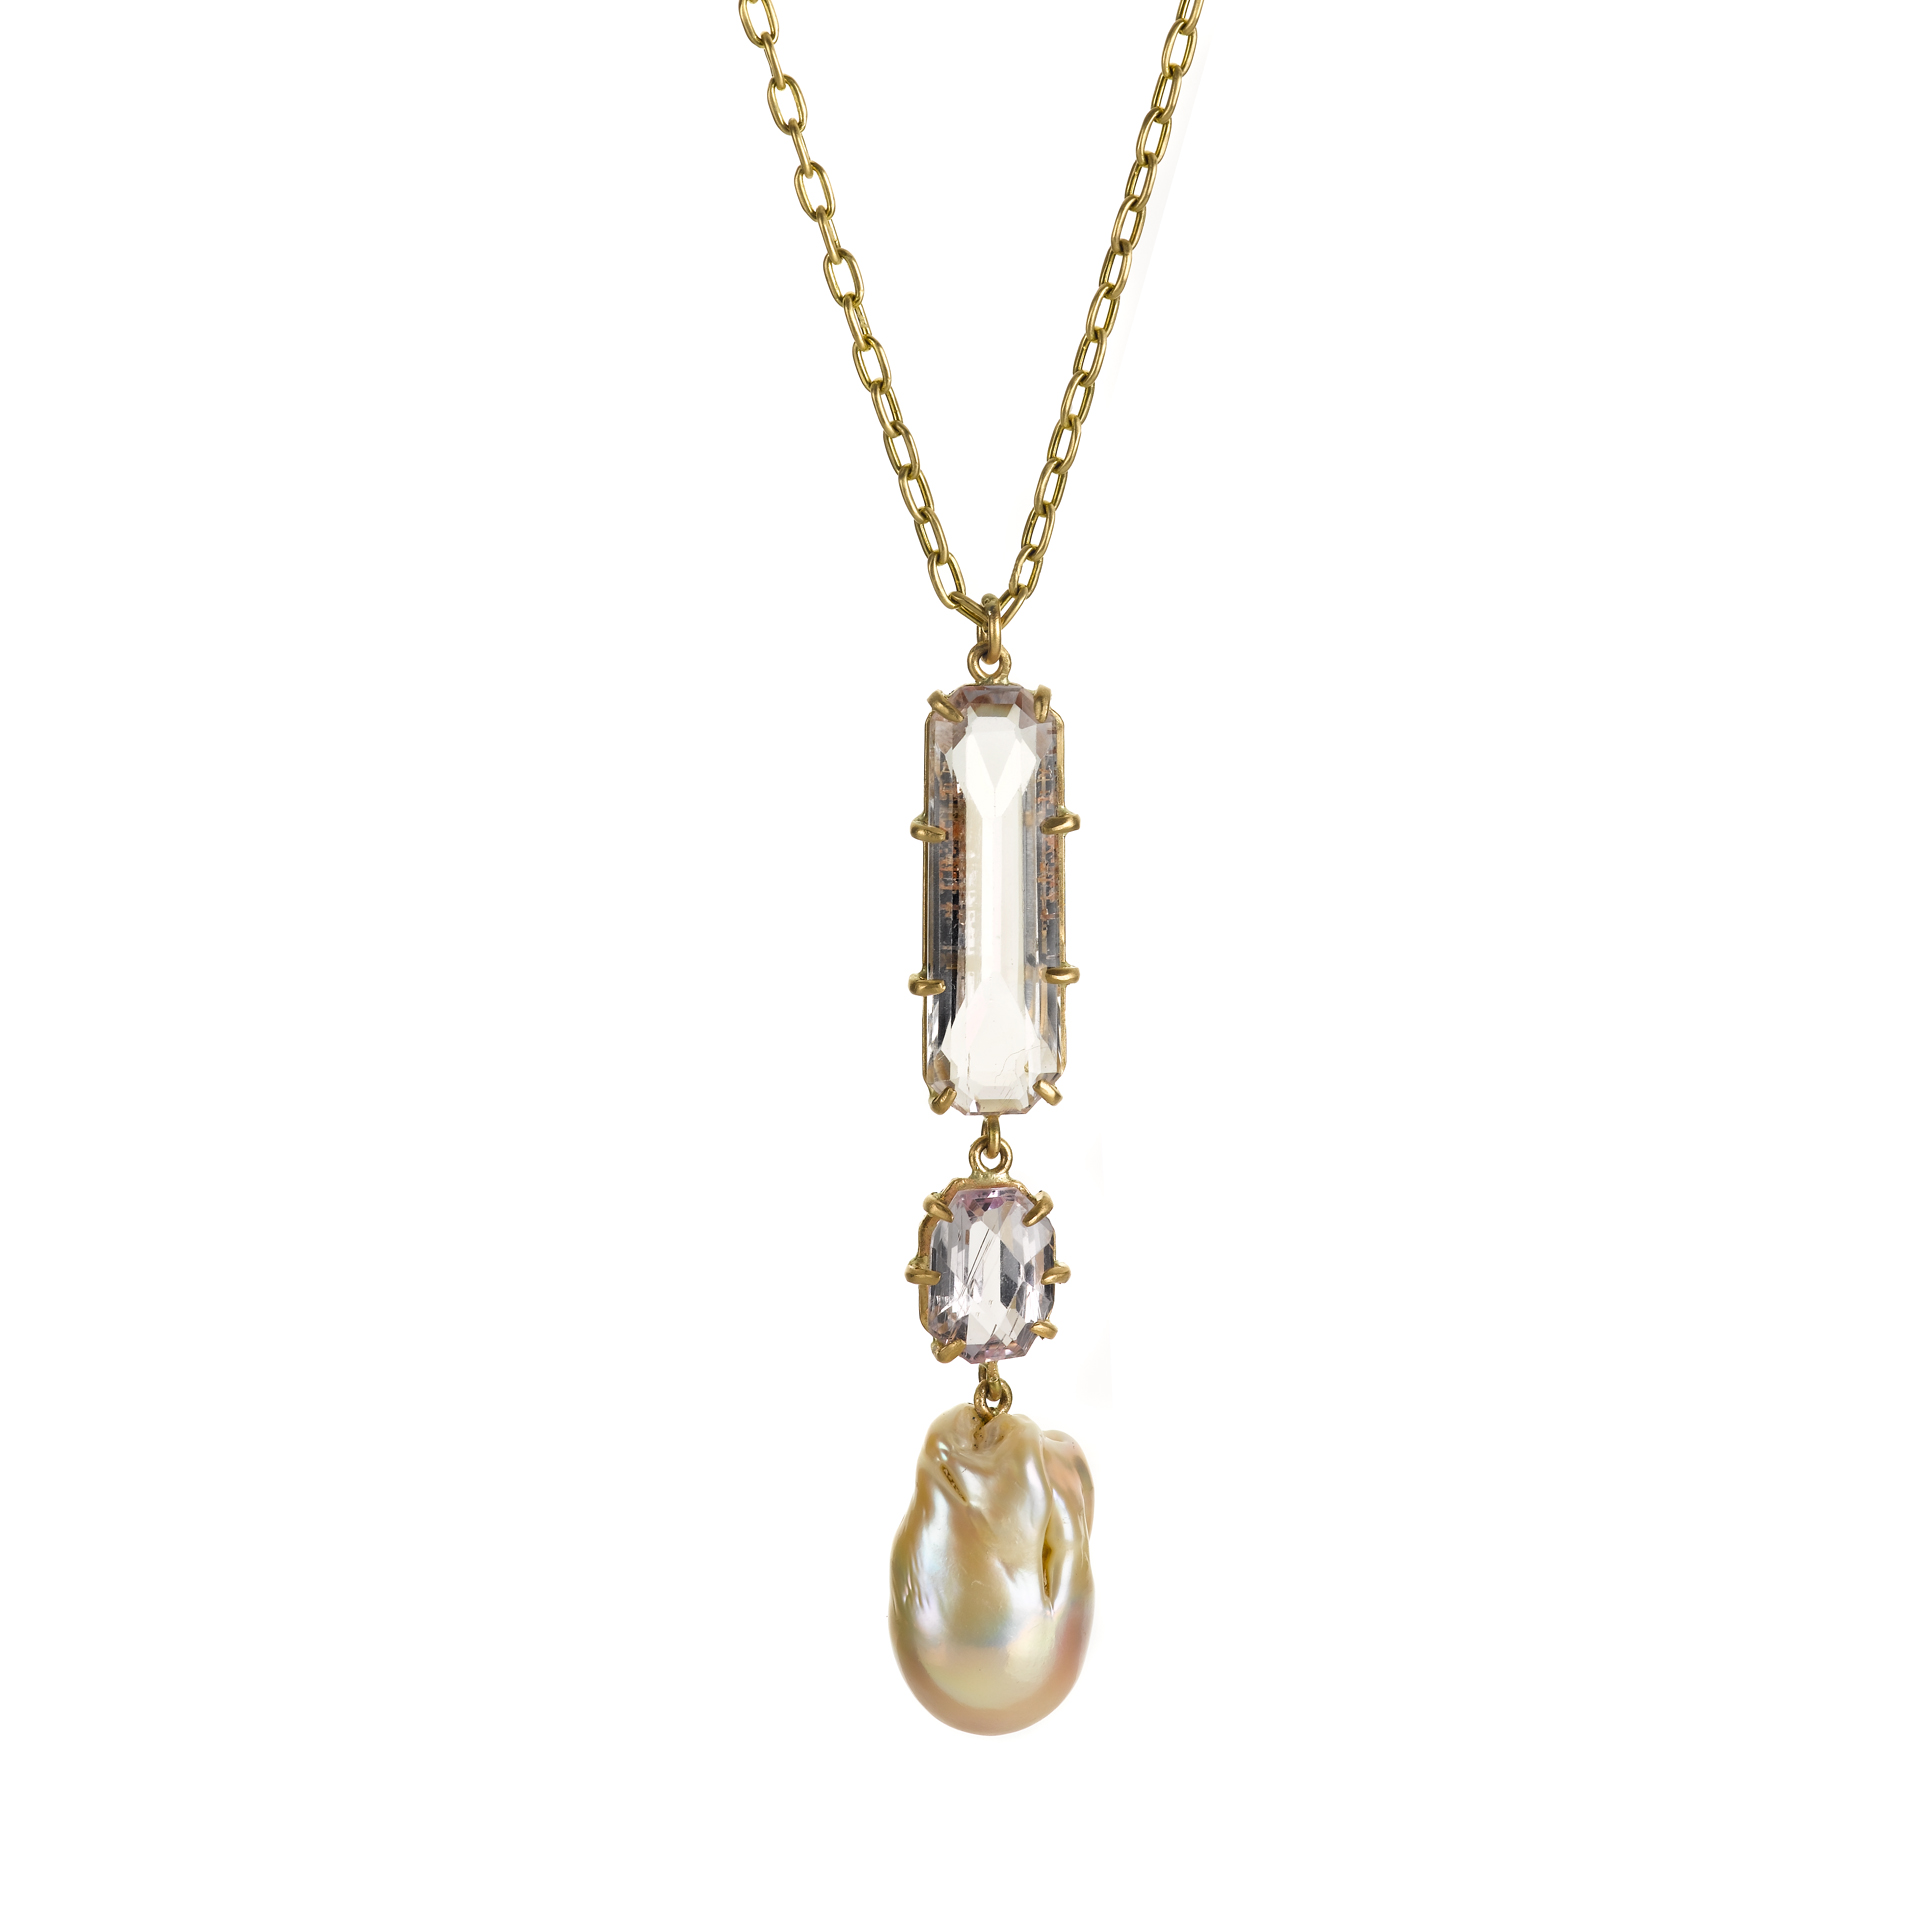  Pendant in 18k gold with a 27.09 ct. kunzite and baroque freshwater pearl,&nbsp;$7,920. 